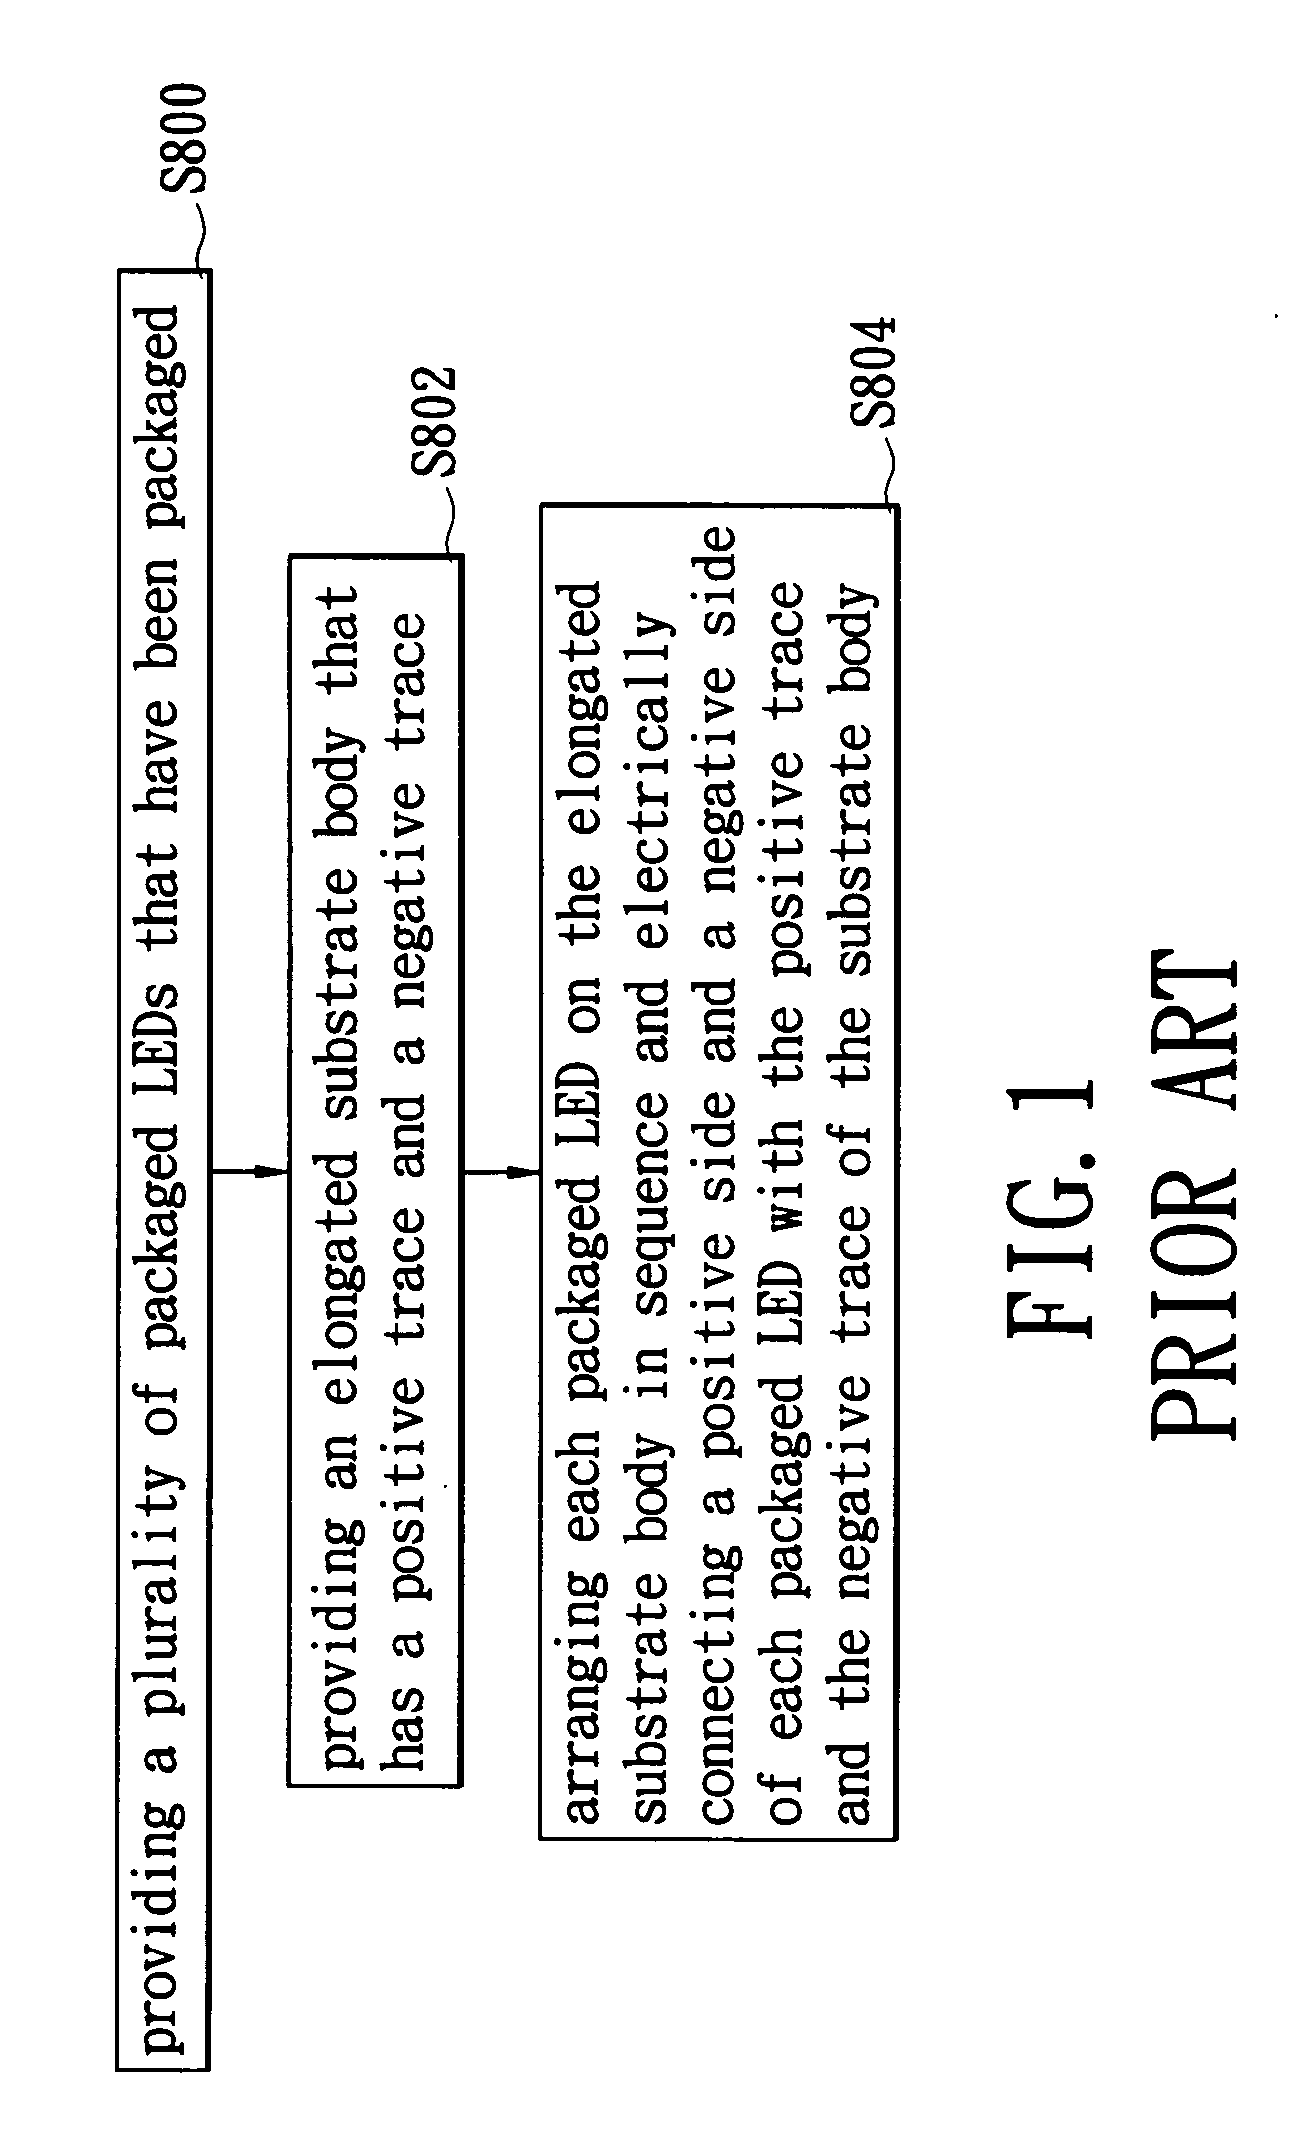 LED chip package structure applied to a backlight module and method for making the same